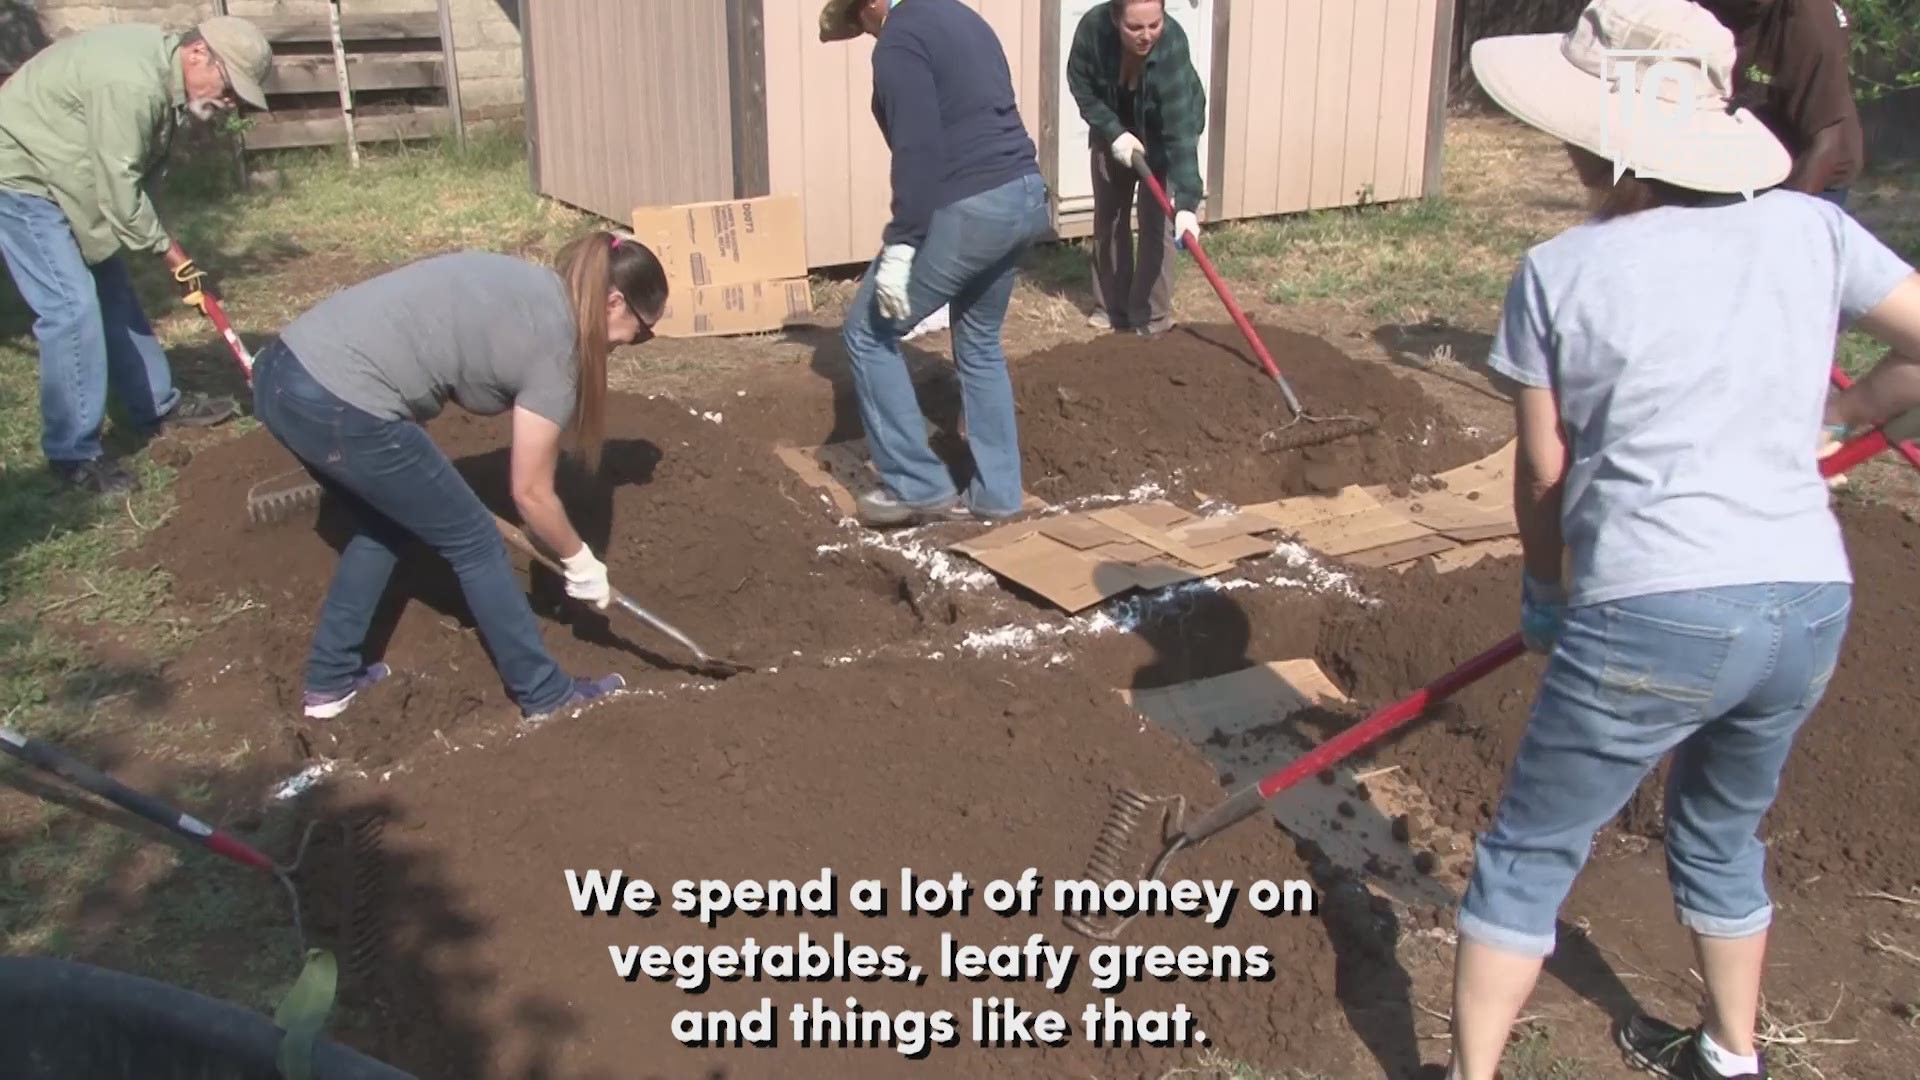 Watch what it takes to build a backyard garden in just a few hours.